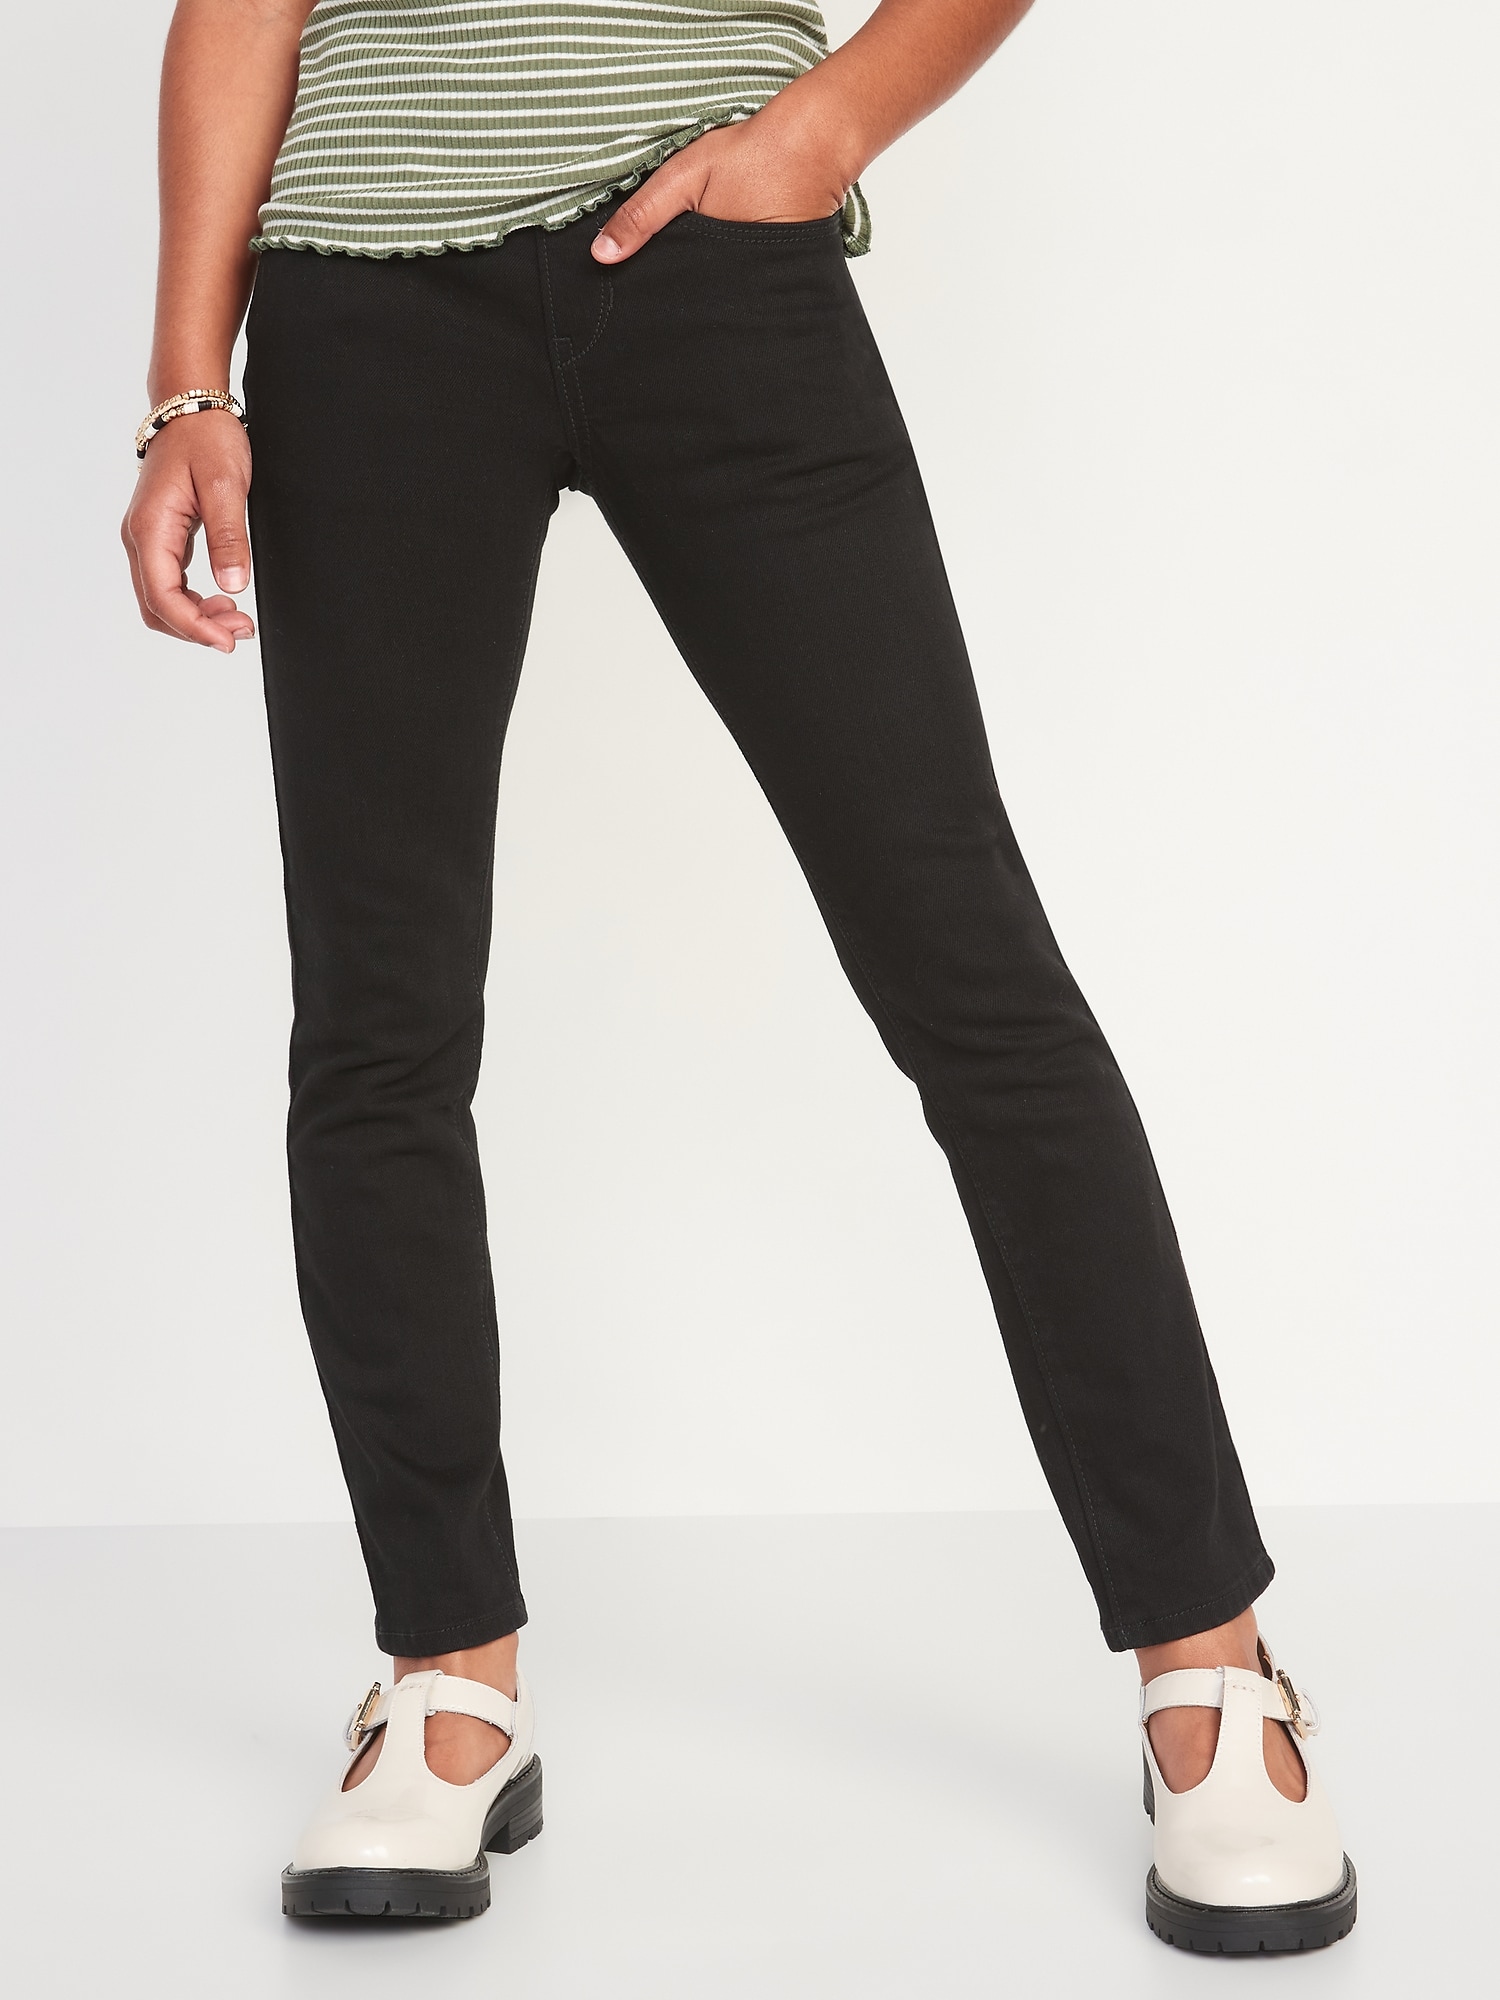 Wow Skinny Pull-On Black Jeans for Girls On Sale At Old Navy